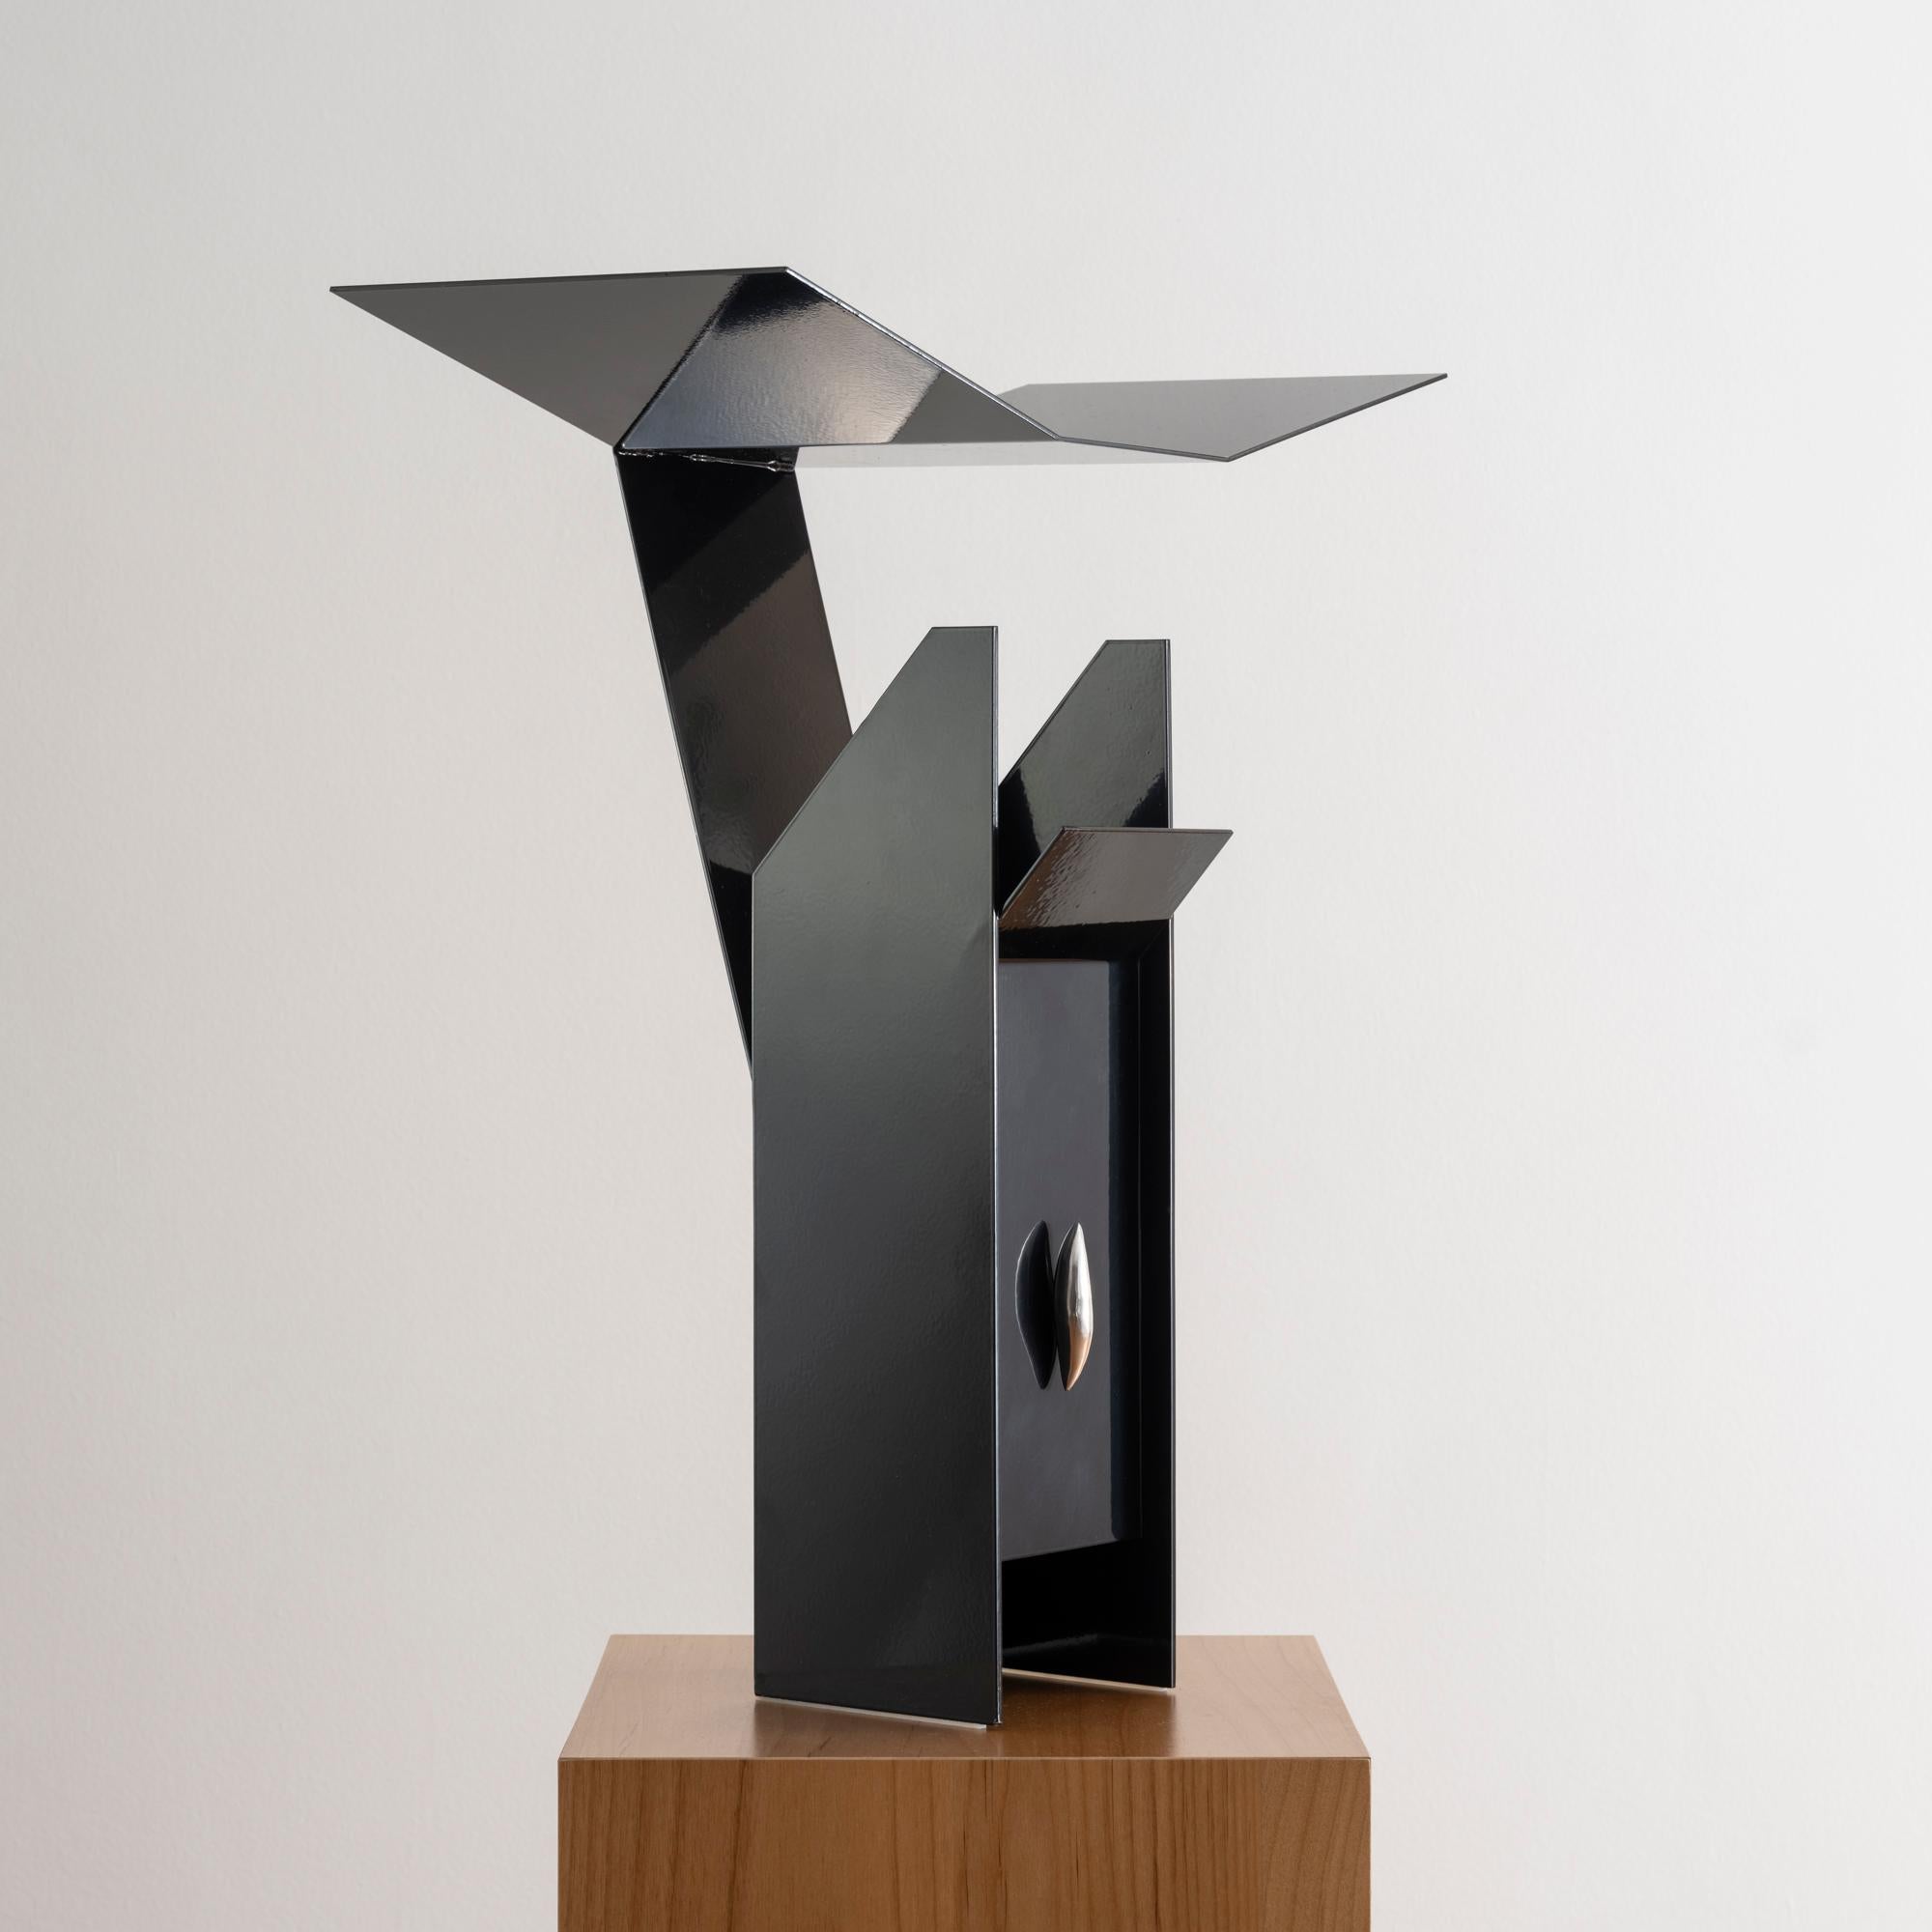 Designed by EJR Barnes in 2023, this contemporary industrial-style steel table lamp is sculpturally bent into an angular shape to artfully reflect and diffuse light beneath a folded metal canopy. 

Entitled 